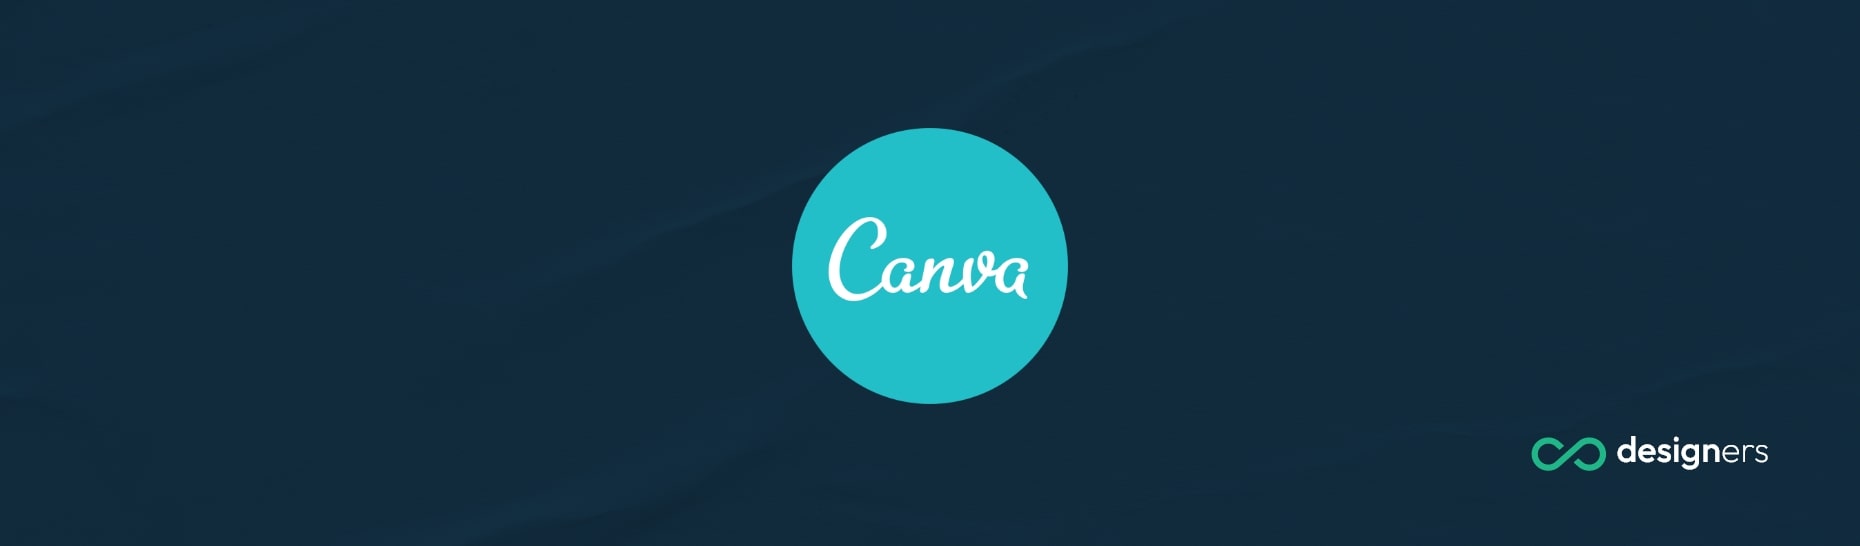 Does Canva Have Stock Videos?